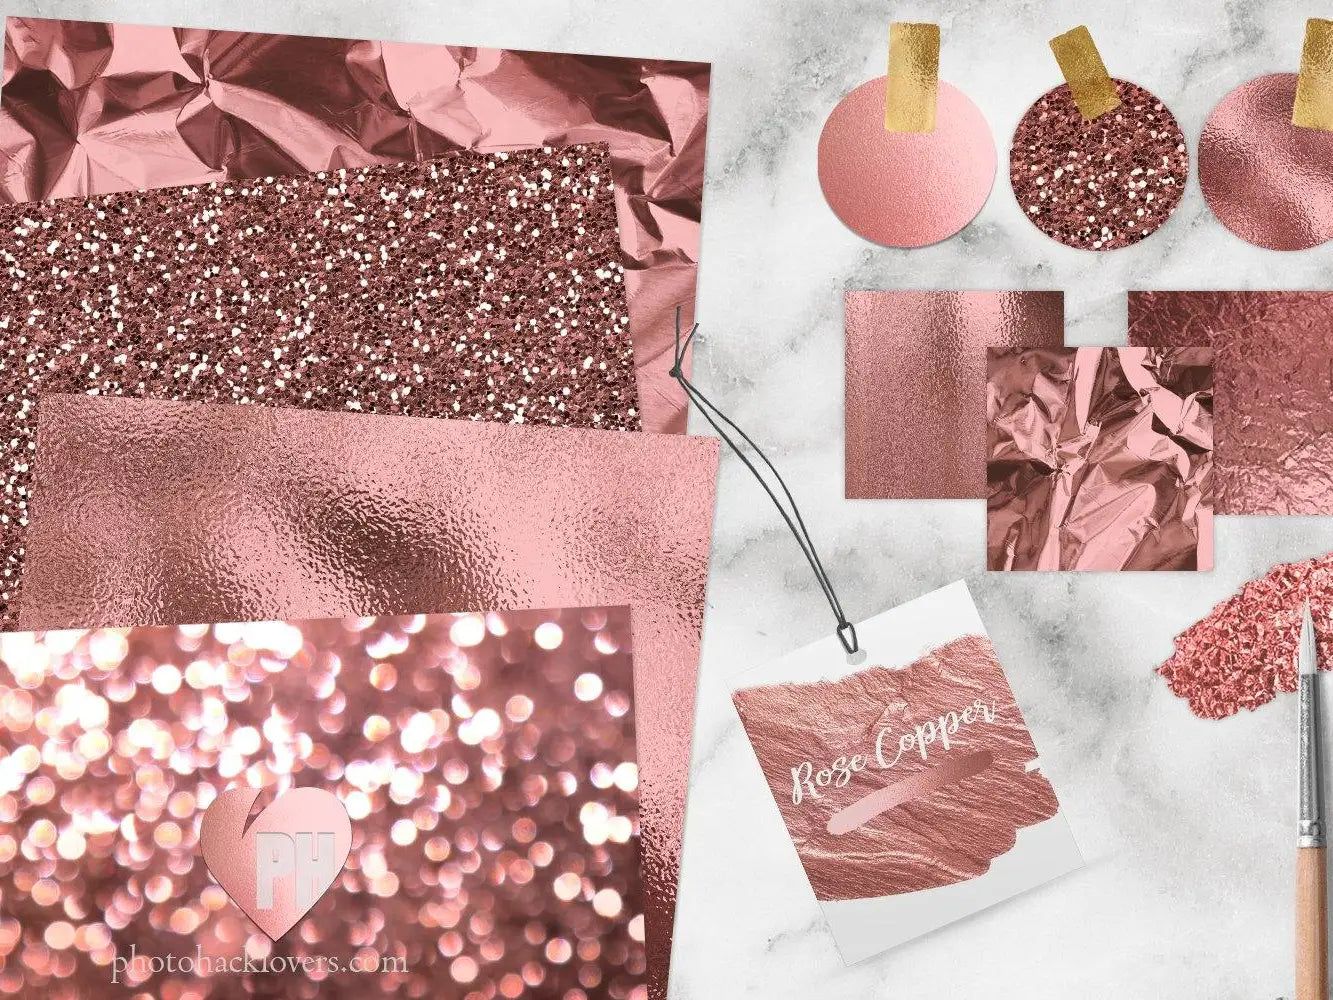 A mood board with rose gold and copper foil textures, patterns and design elements. - Rose gold, bling